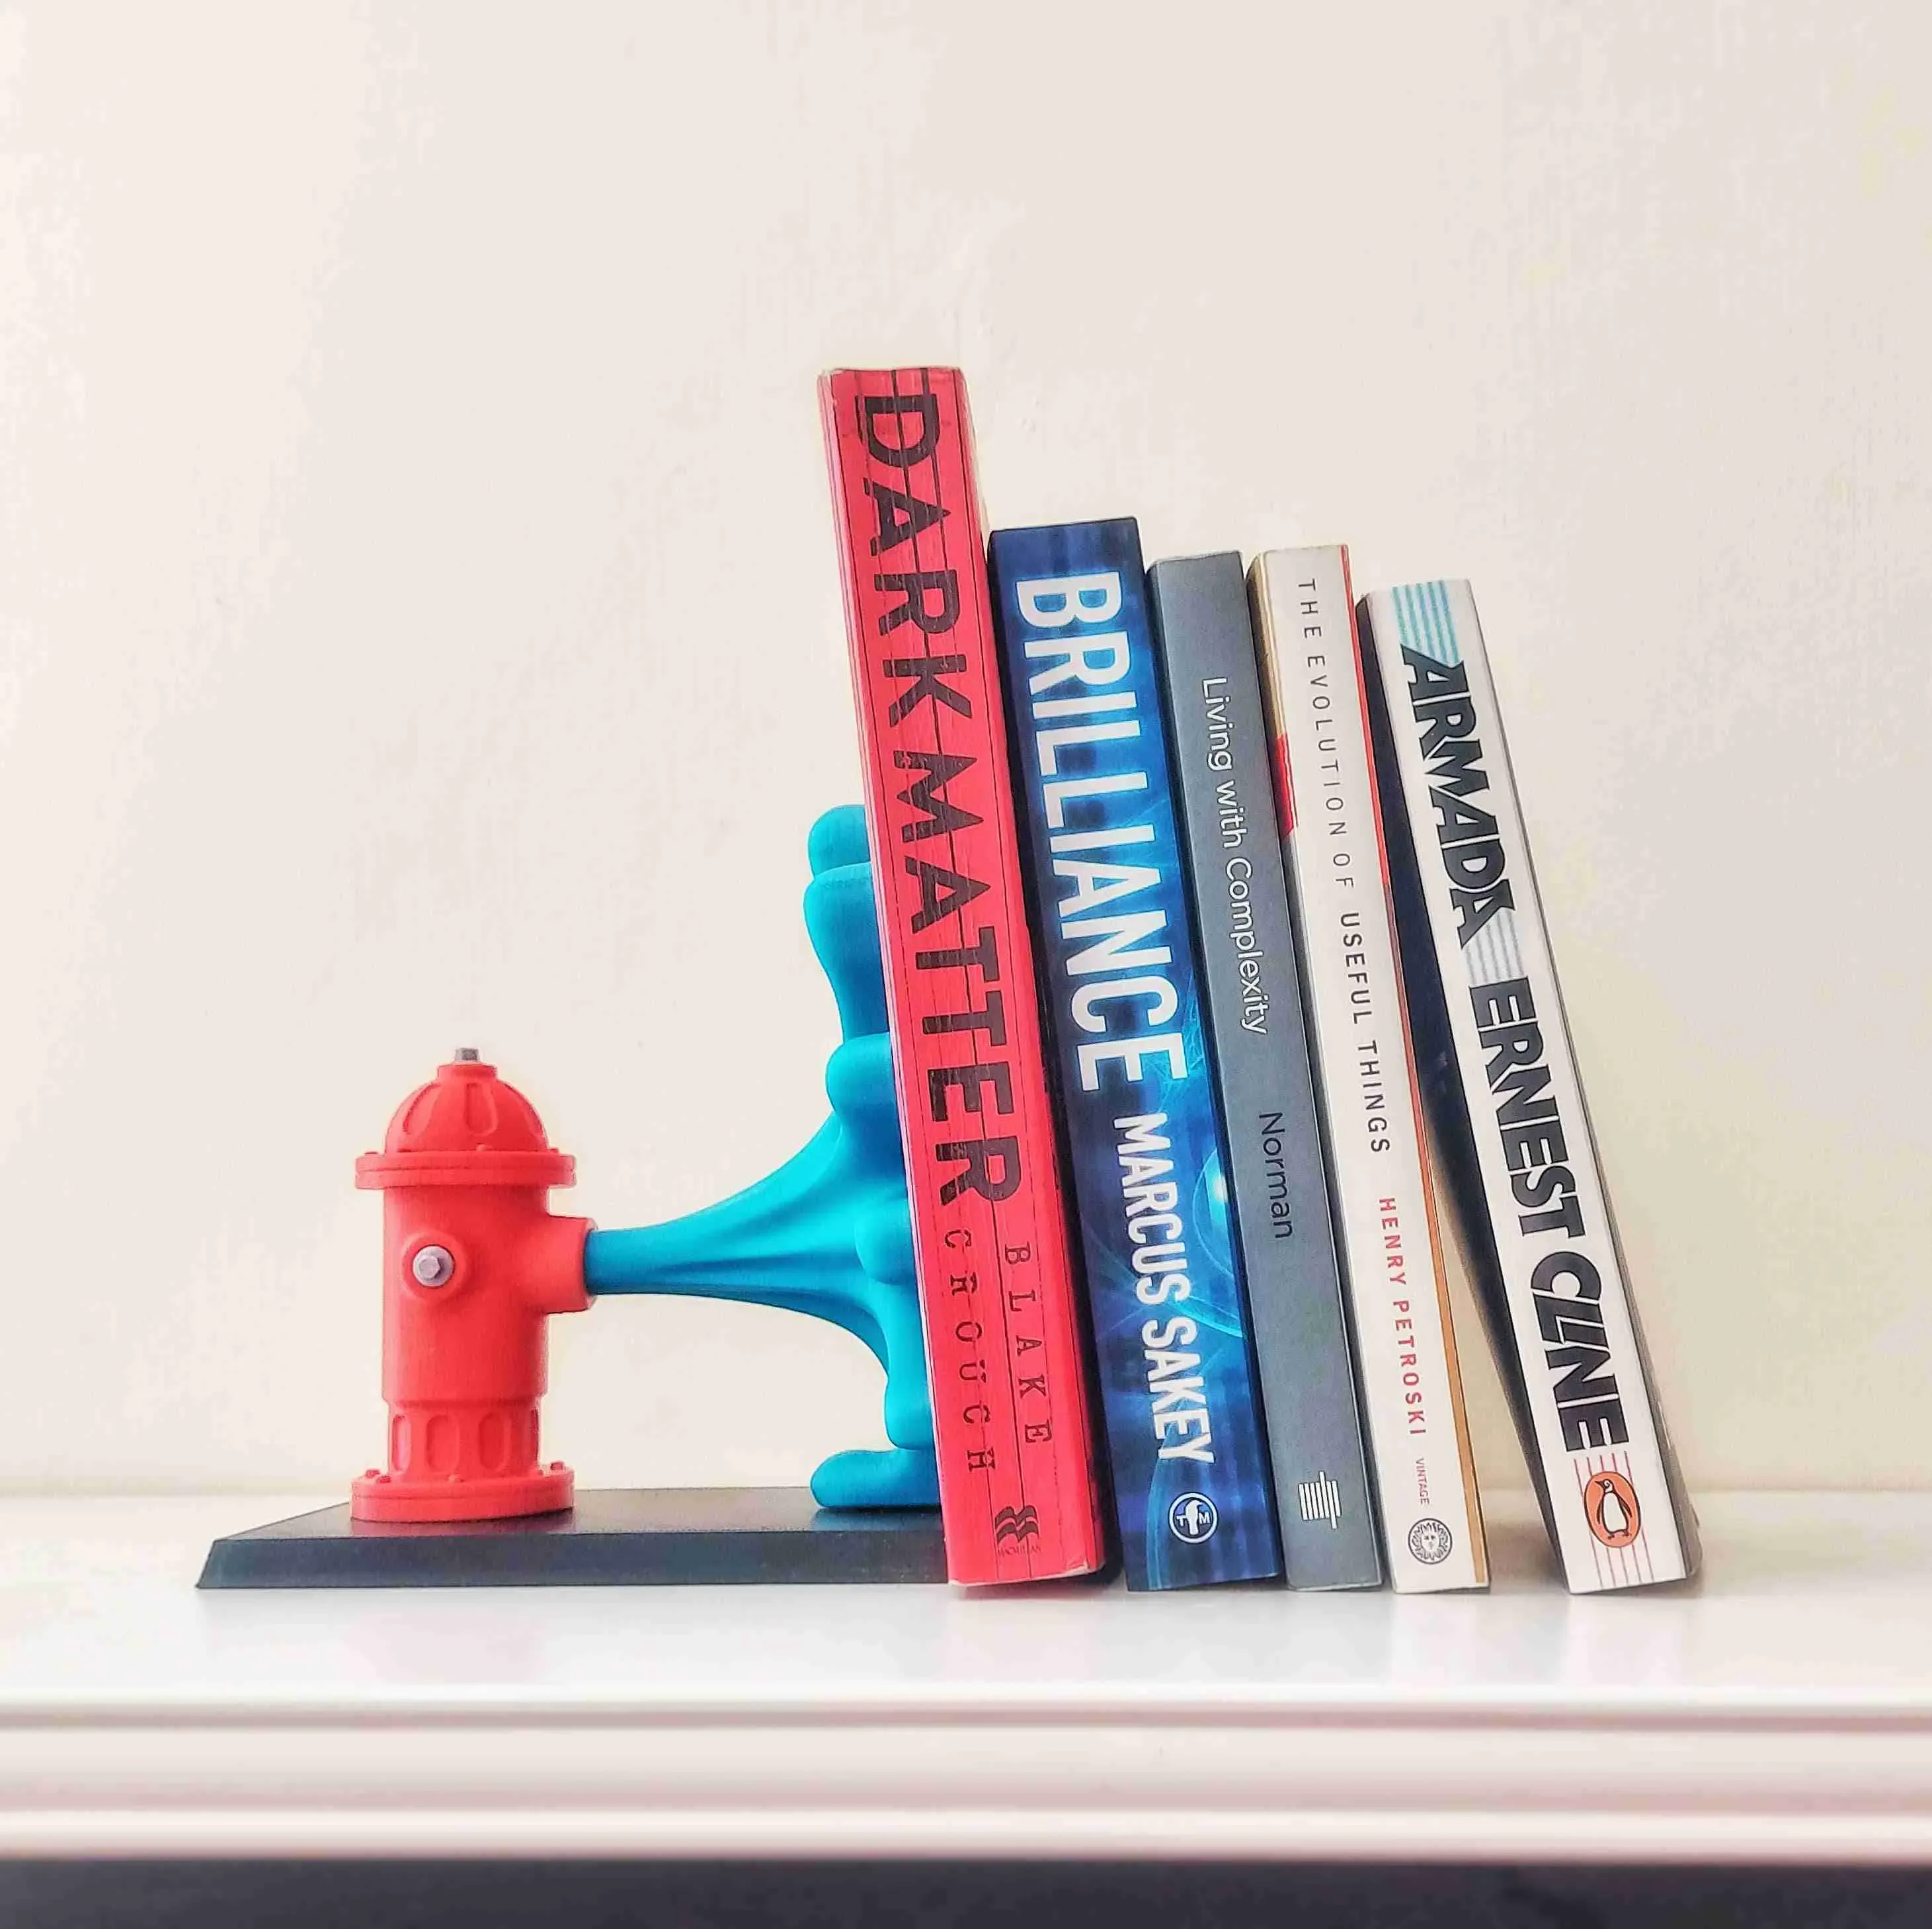 Fire Hydrant Bookend